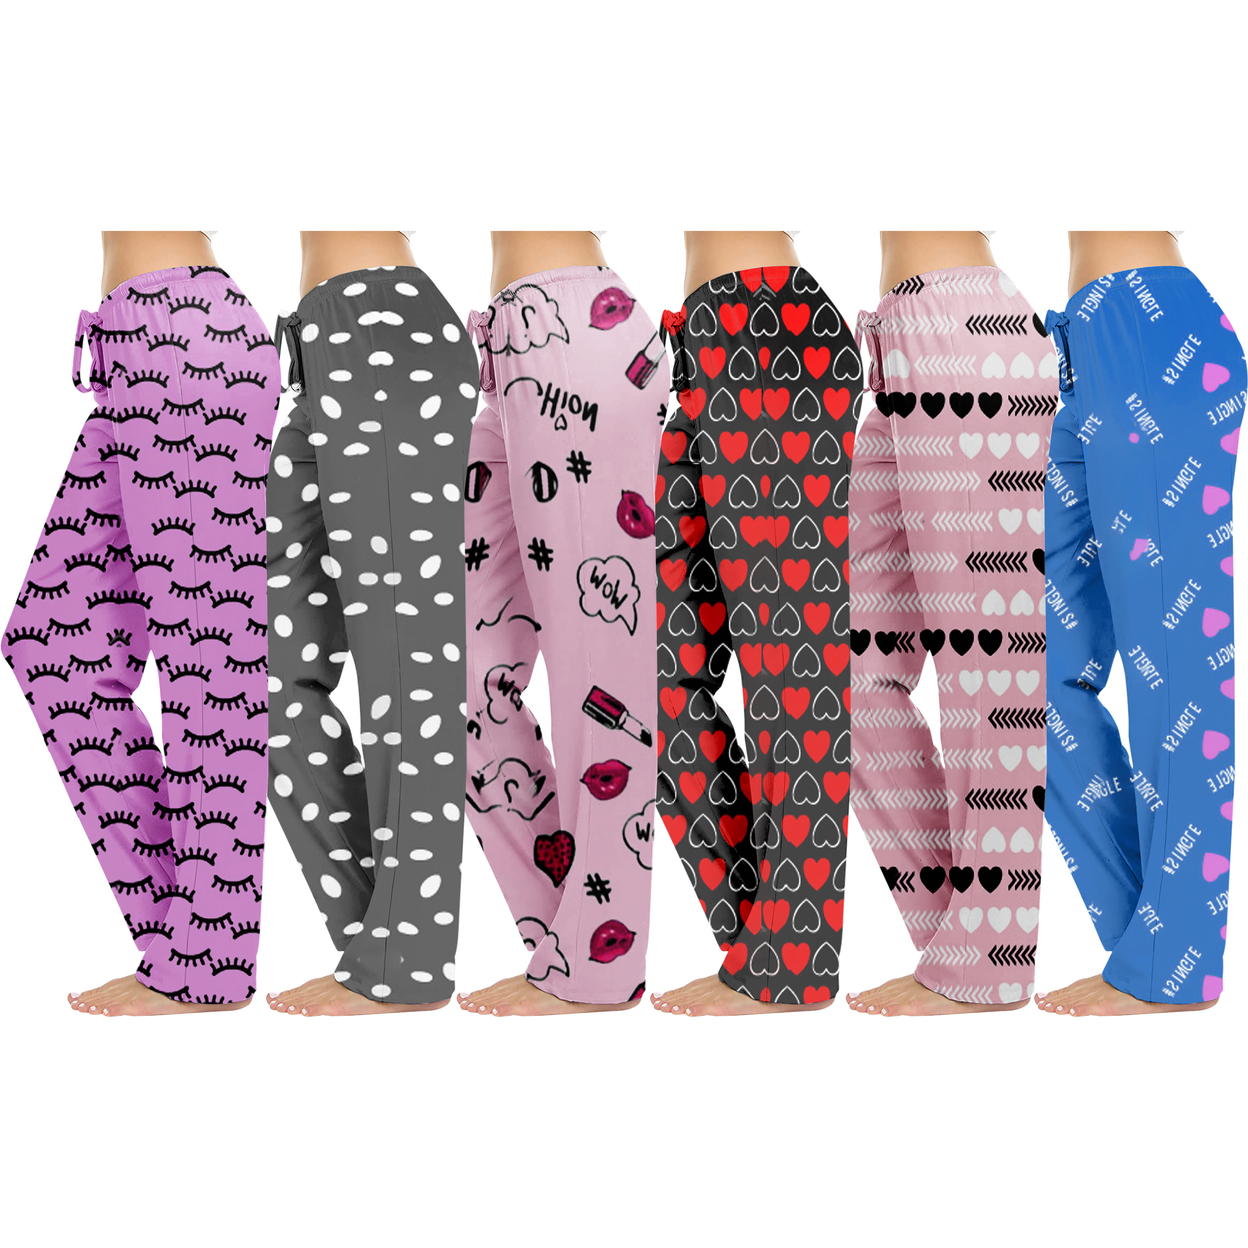 5-Pack: Women's Casual Fun Printed Lightweight Lounge Terry Knit Pajama Bottom Pants - Large, Shapes